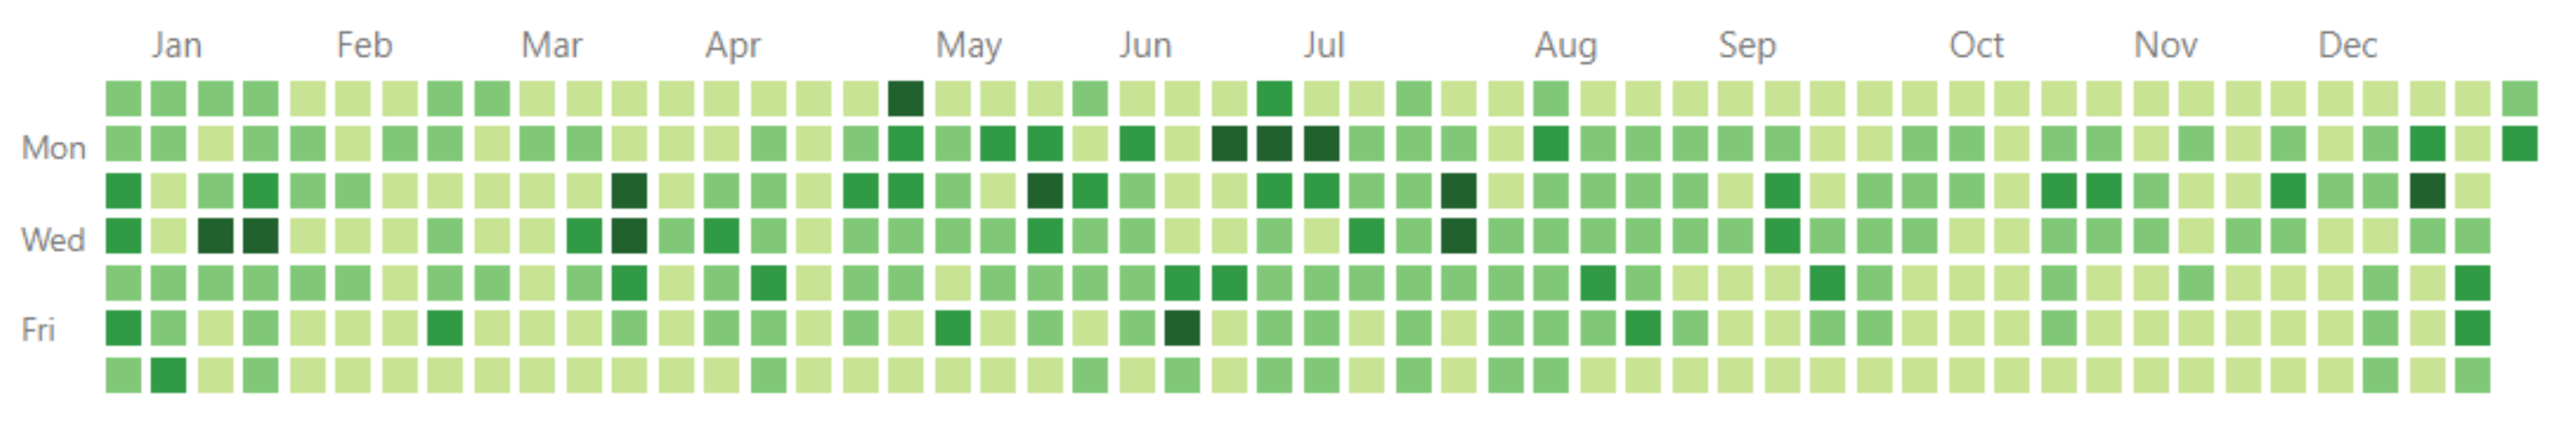 GitHub Contributions Graph full squares that have various shades of green